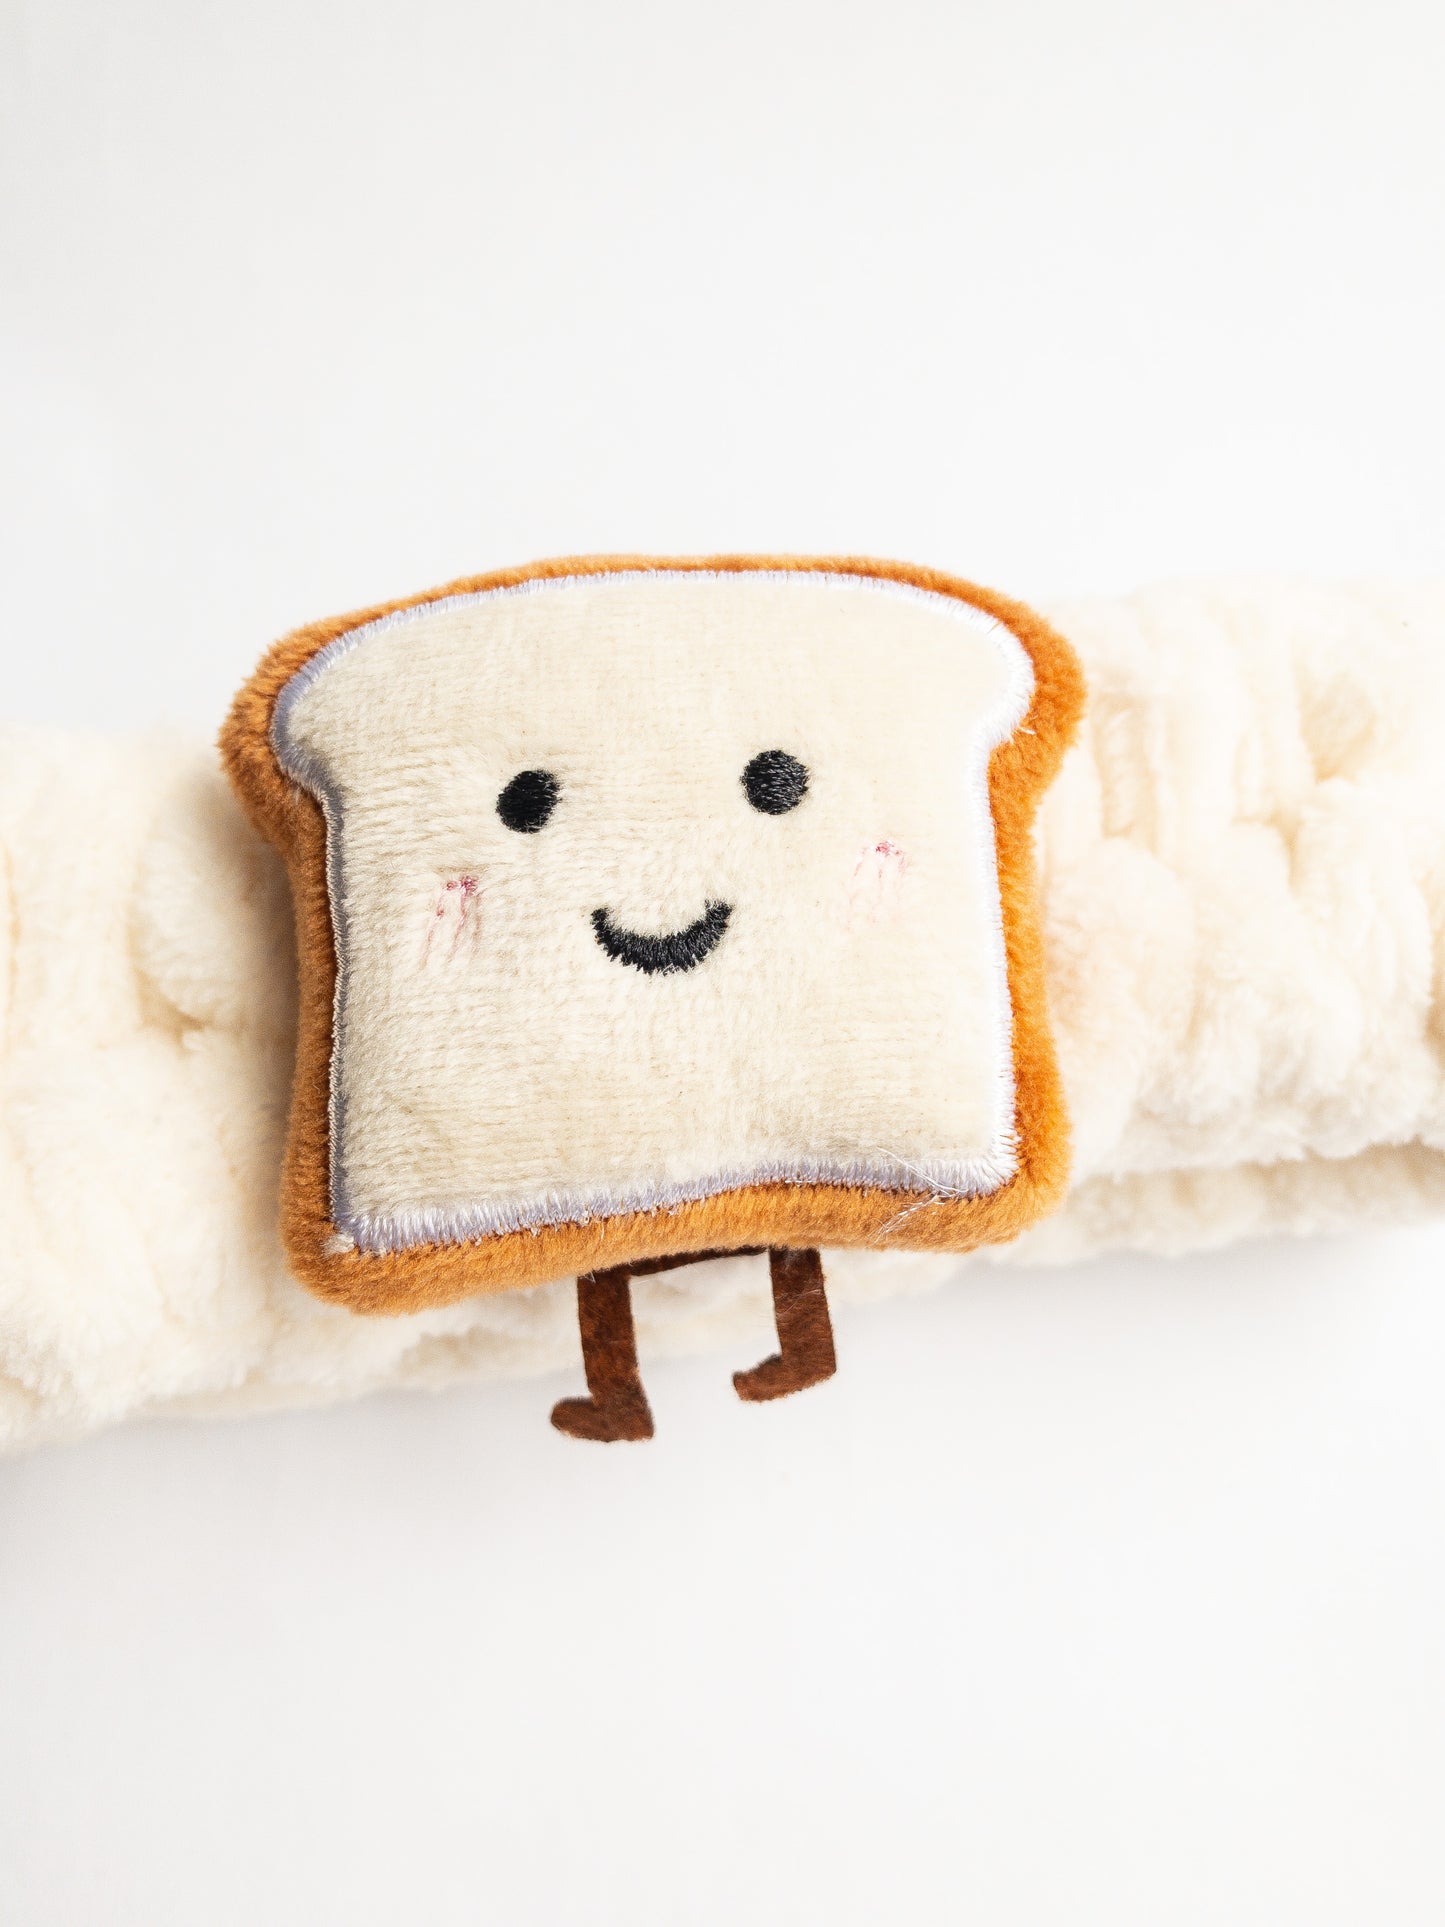 Our adorable brick toast plush spa headband makes the perfect accessory for all your spa days! Each headband is so soft and comfy with a cute and happy little brick toast. Pamper yourself in plushy-goodness and sweet, sweet relaxation! Go ahead, you deserve it!